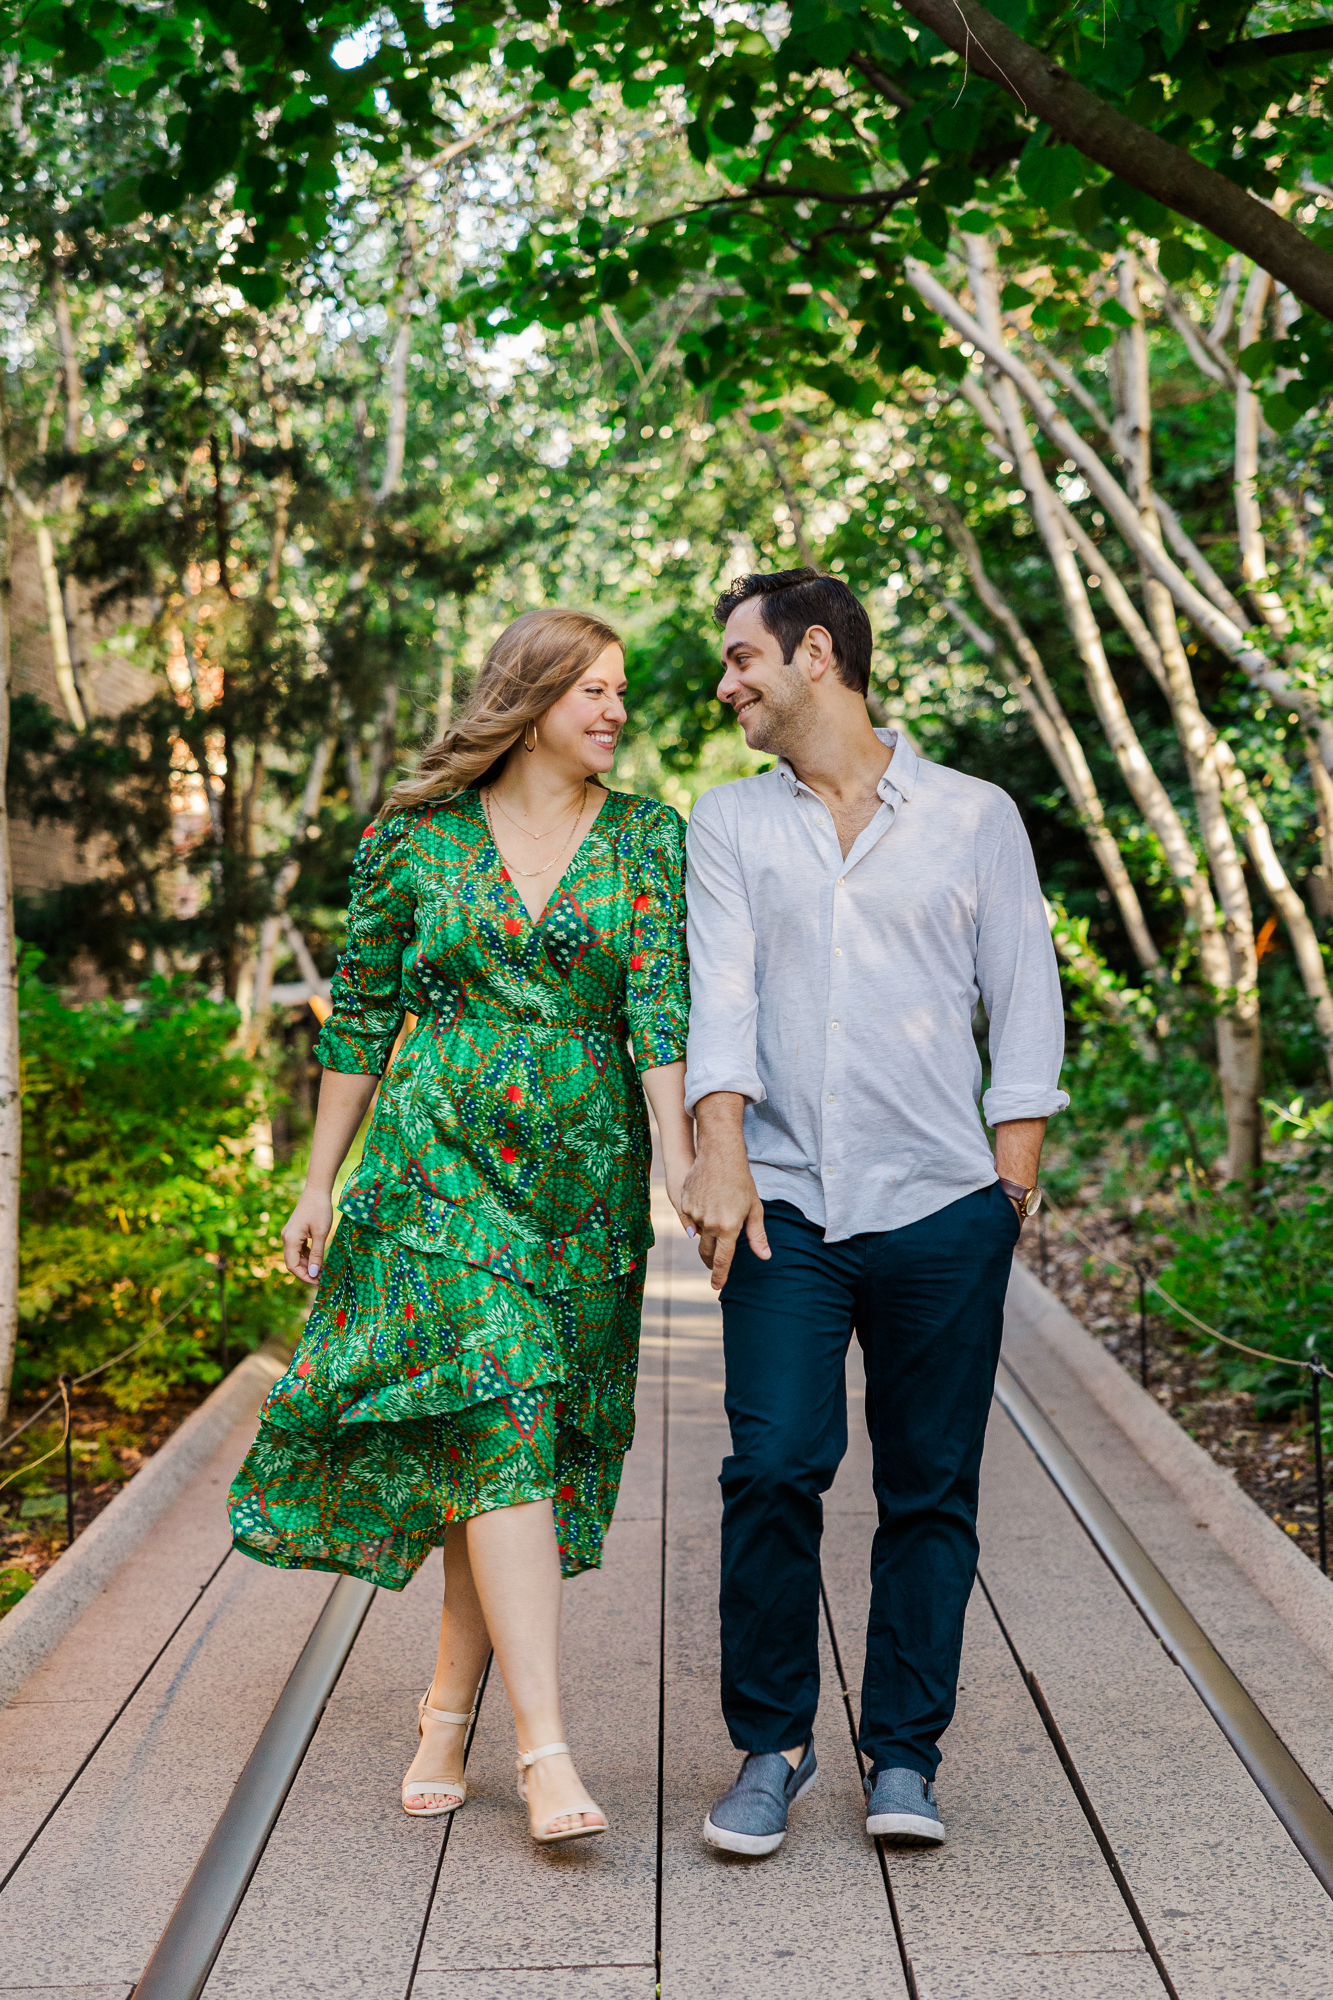 Stunning Summer High Line Engagement Photography in the West Village